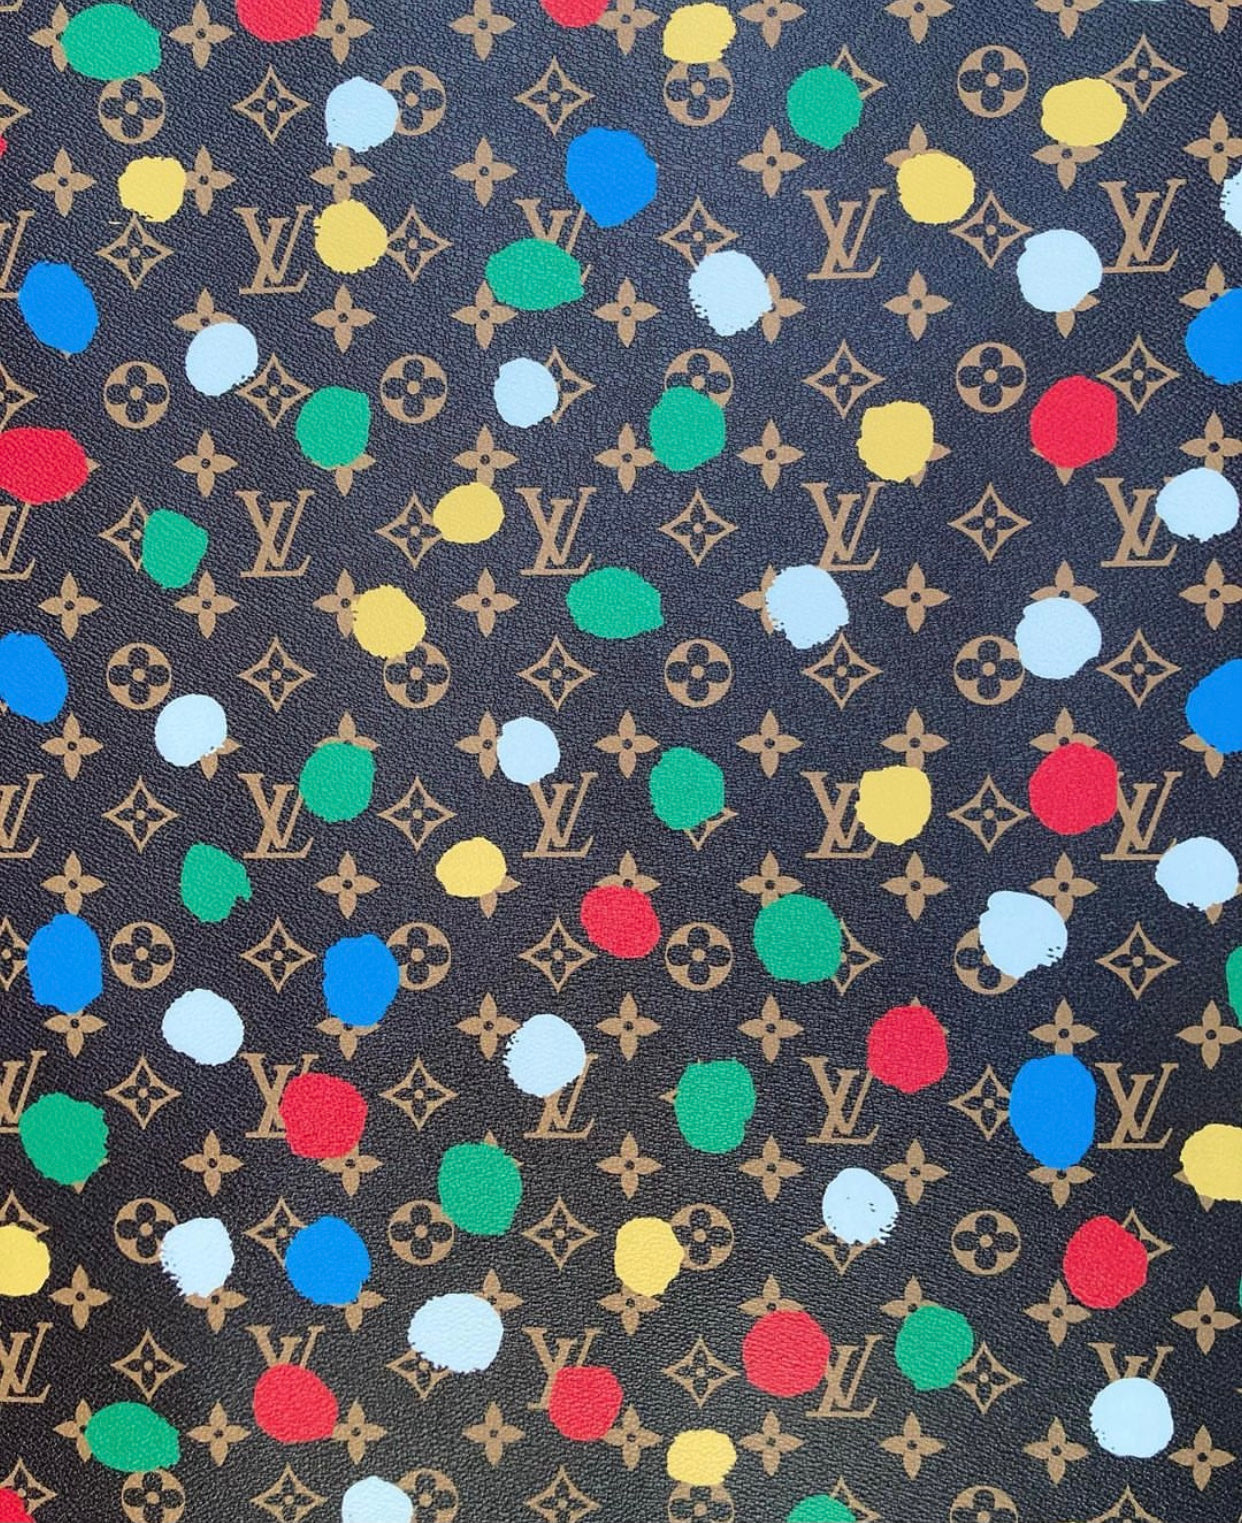 Colorful Dots LV Vinyl Leather for Custom Bag Sneakers